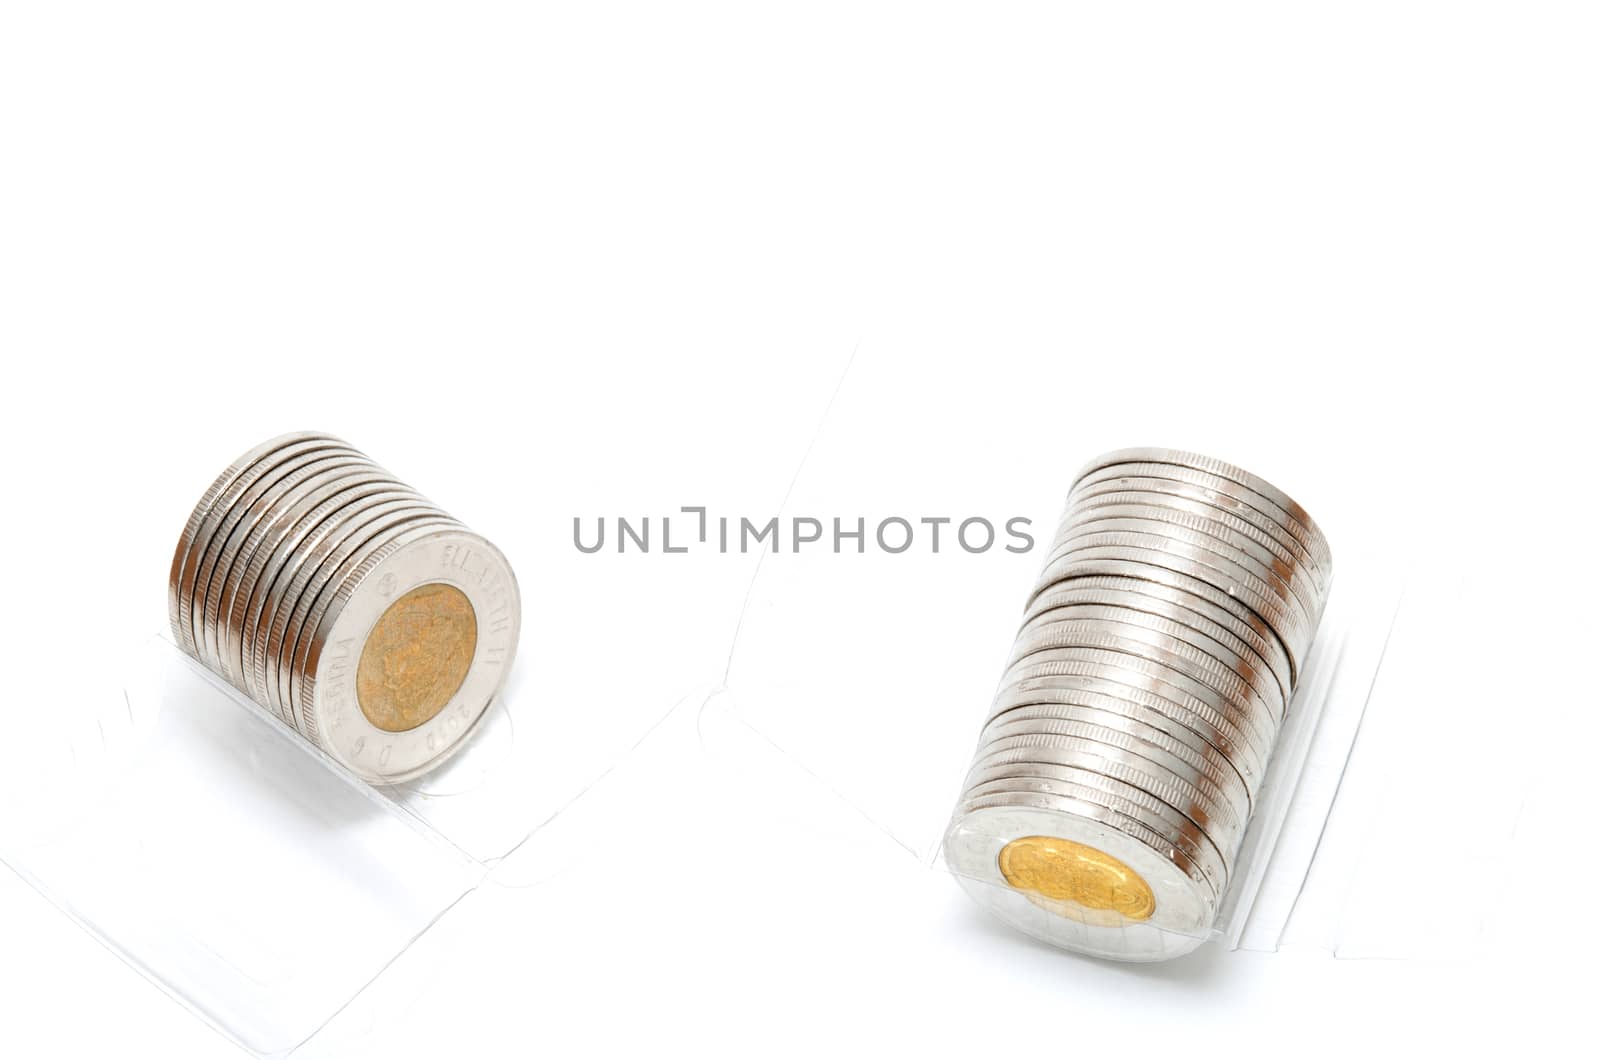 Plastic roll holding two dollar coins by daoleduc